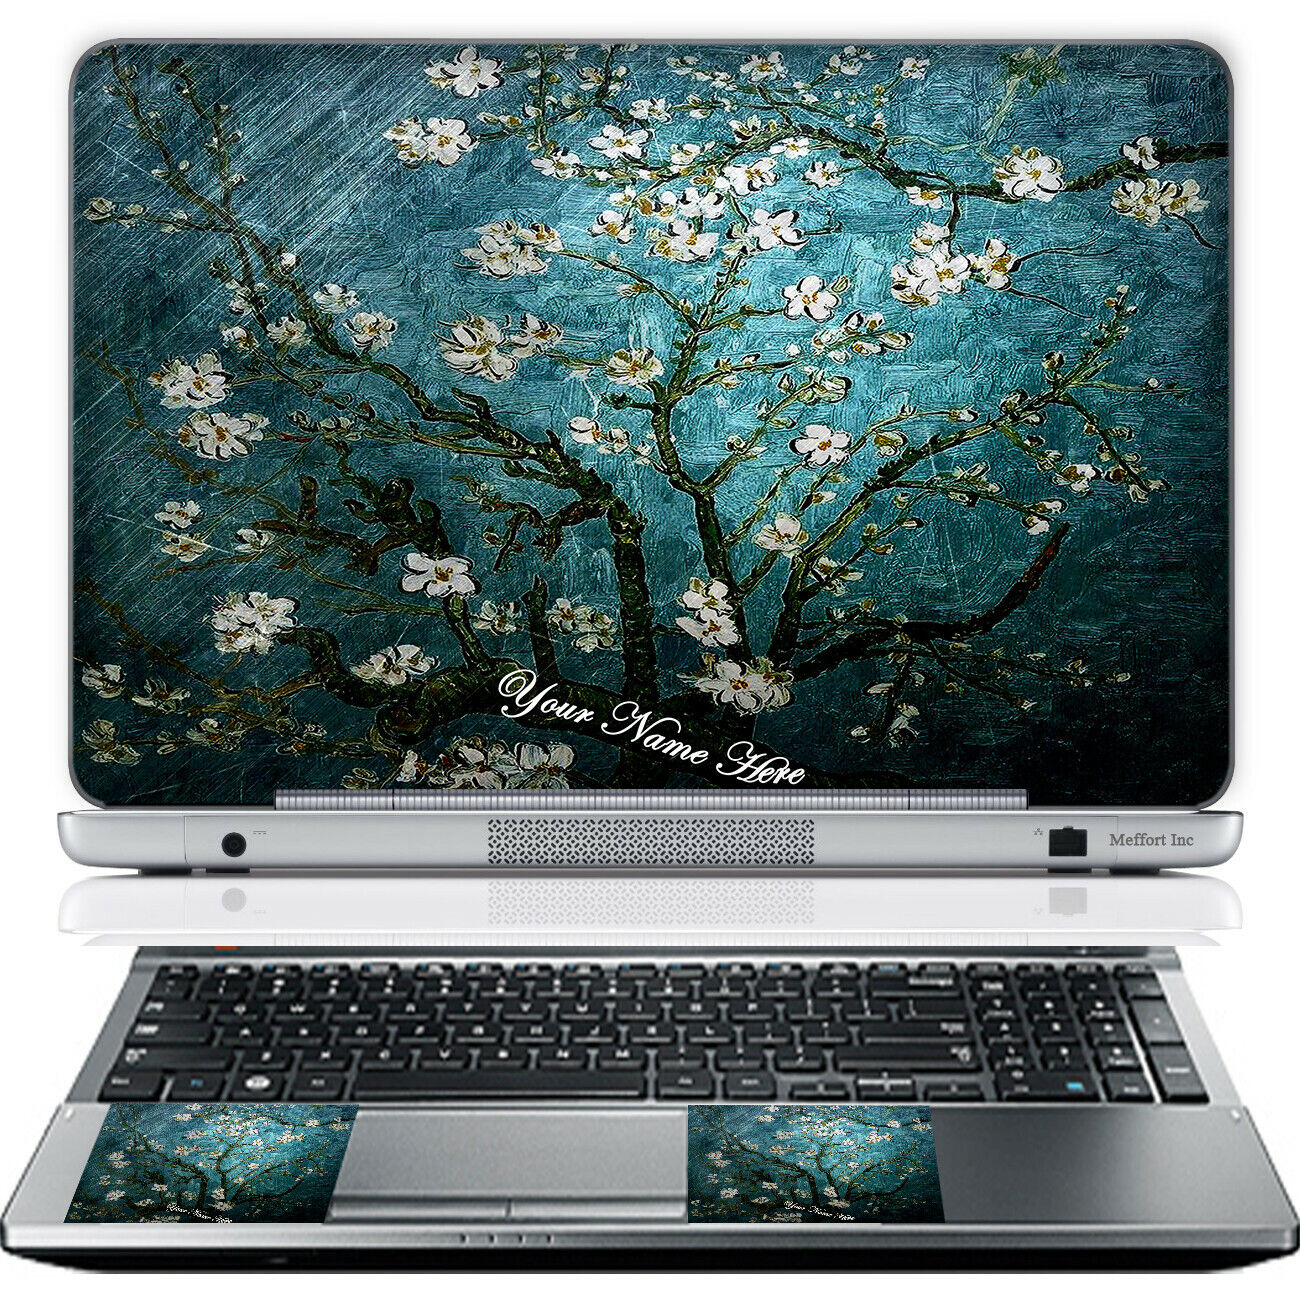 15 Inch Laptop Skin Sticker Cover Art Decal & Wrist Pad Customize Your text